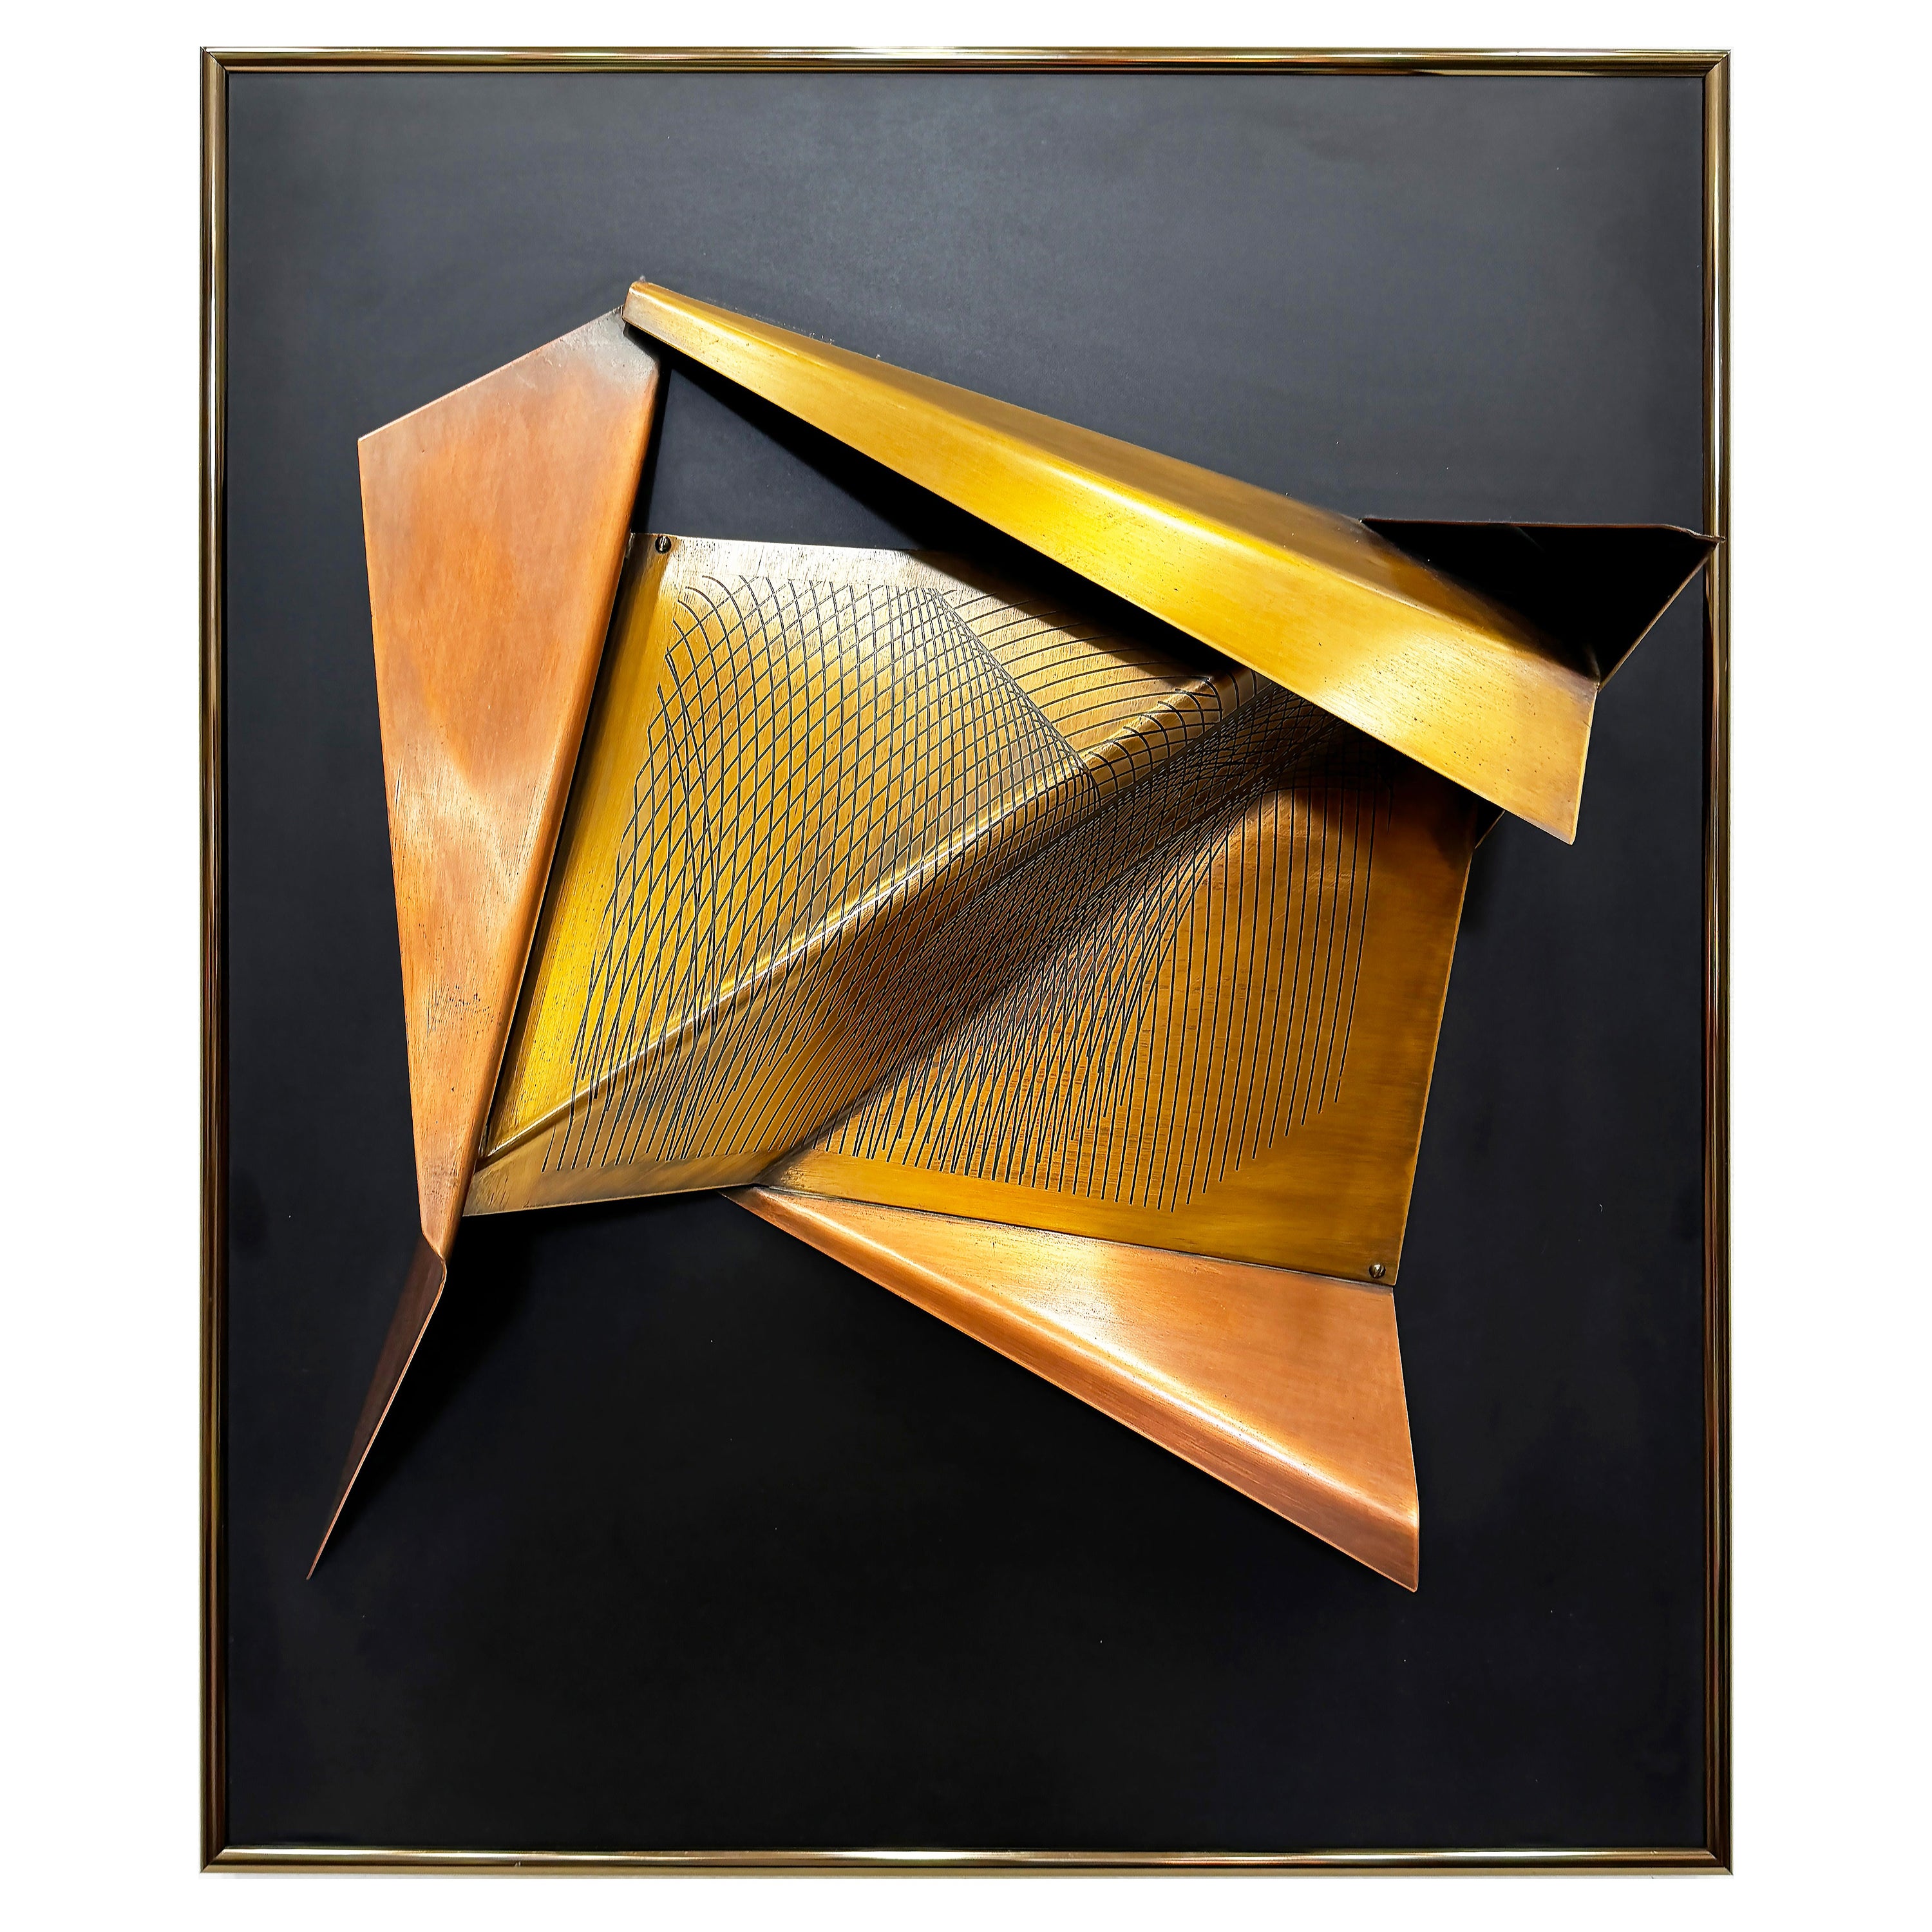 Ron Hinton 1994 3D Metal Wall Sculpture "Linear Sketch" For Sale